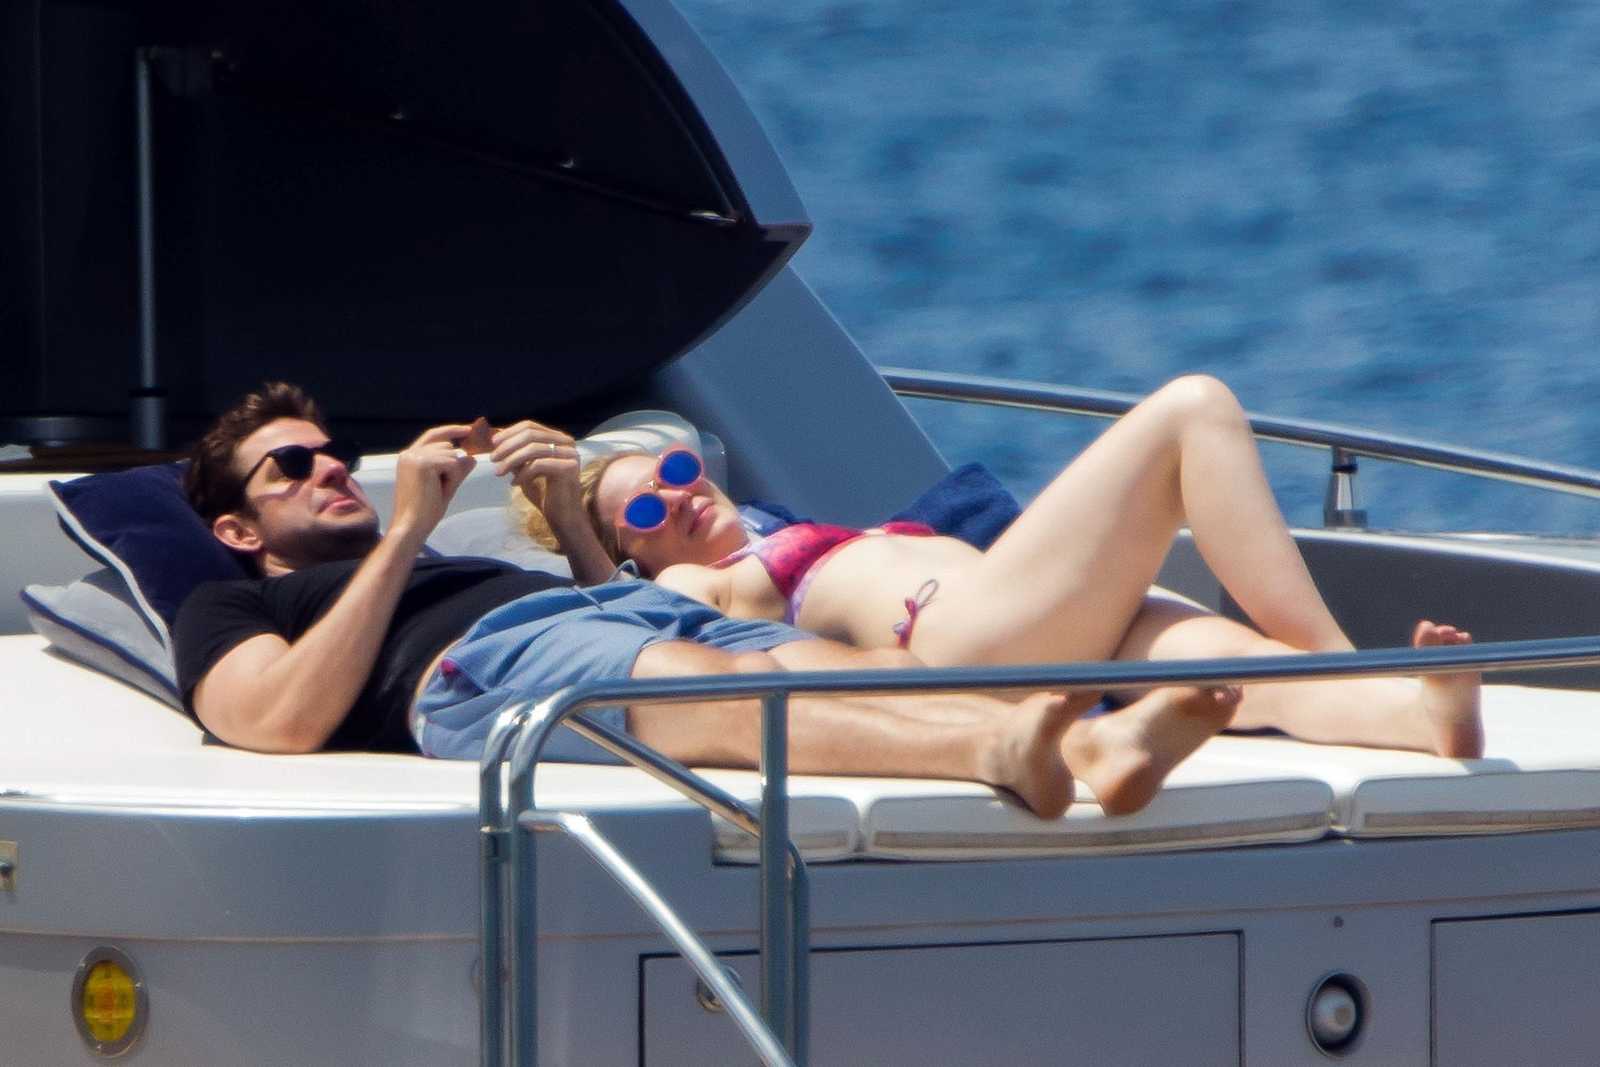 Emily_Blunt_-_In_a_yacht_in_Tuscany2C_Italy_on_June_7-01.jpg